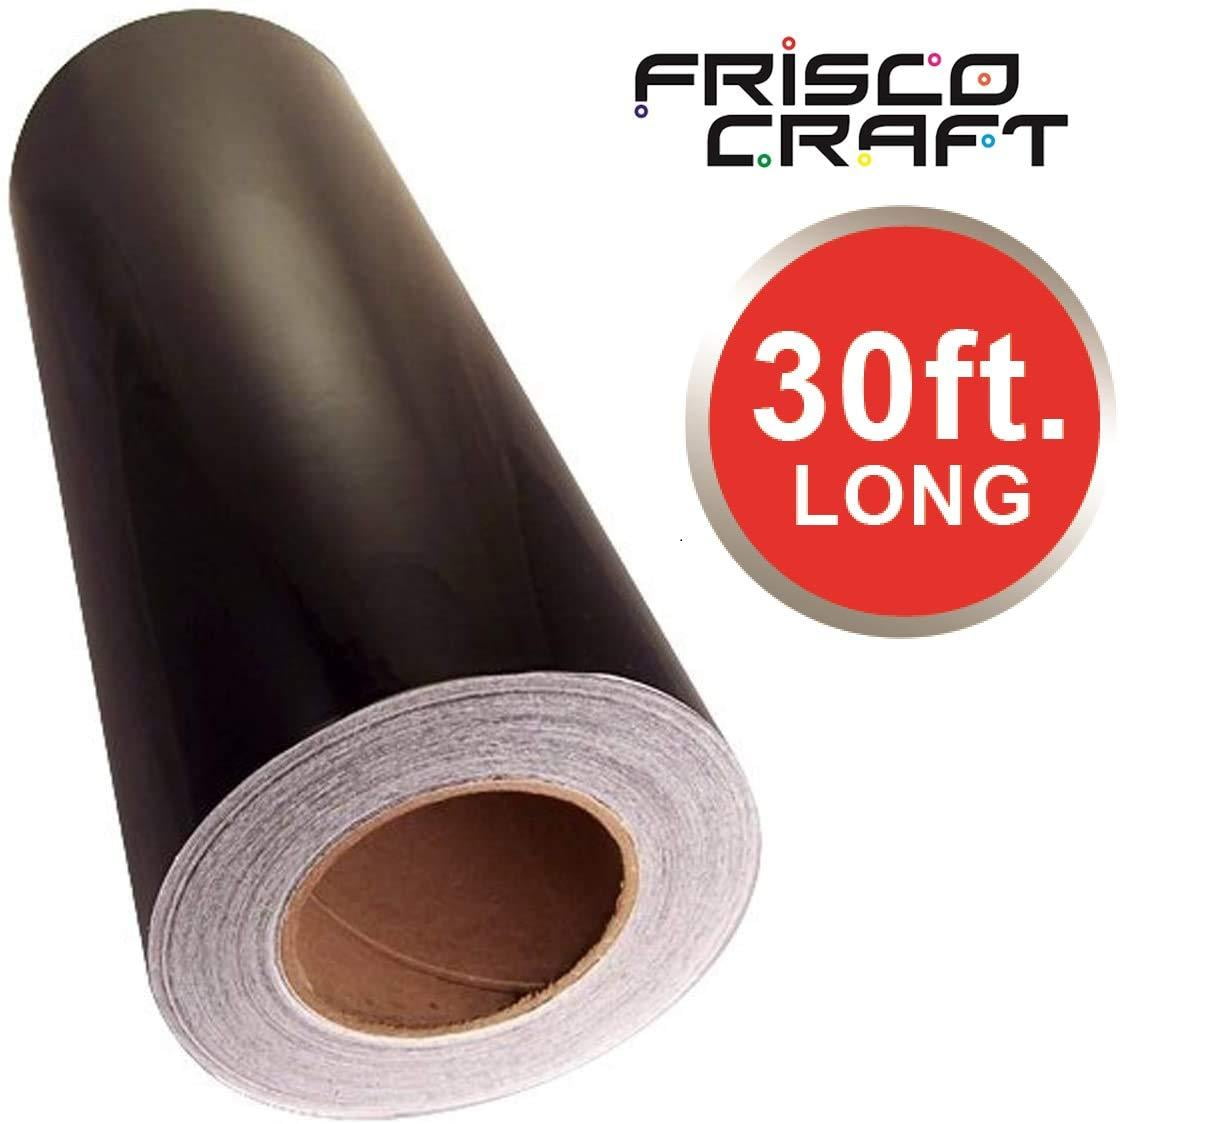 Low Cost Craft Vinyl Sheets & Rolls  Cricut, Silhouette & All Cutters –  Low Cost Vinyl